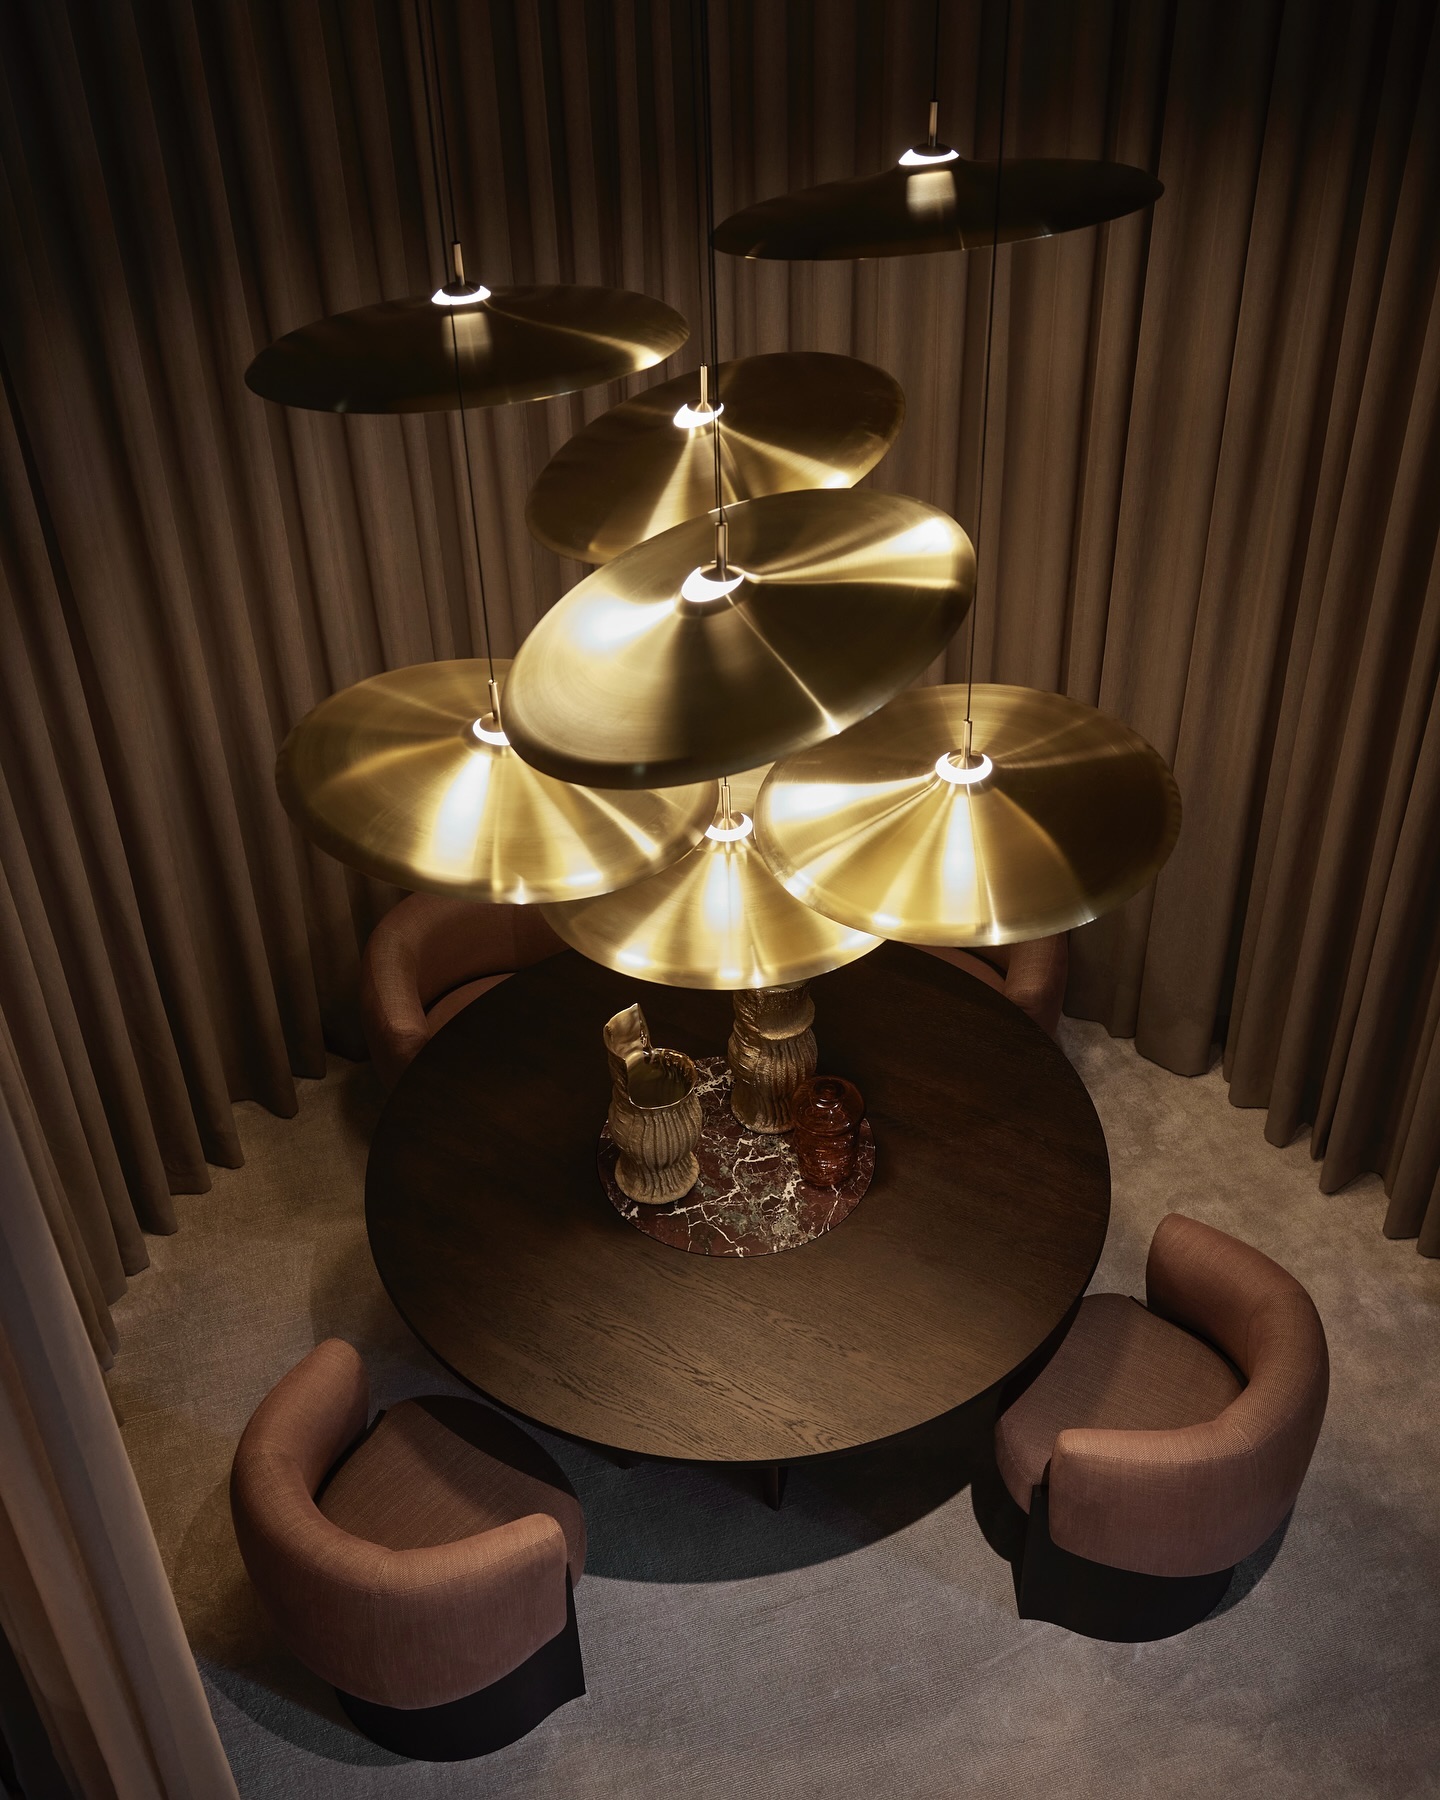 A dining area beneath a waterfall of gold. Introducing our second Salone del Mobile setting: ‘Tinza’ pendant lamps by Visser&Meijwaard, ‘Silva’ dining table (with a marble Lazy Susan!) and ‘Claude’ dining chairs, both designed by our new designer Guillaume Lopez. 

#linteloo #salonedelmobile #newcollection 

Gold vases: @ingebecka.artdesign @mariette.wolbert.textiles 
Glass vase: @studiorinkejoosten 

Photography: @alexandervanbergephotography 
Styling: @bregjenix @circlestudio.nl